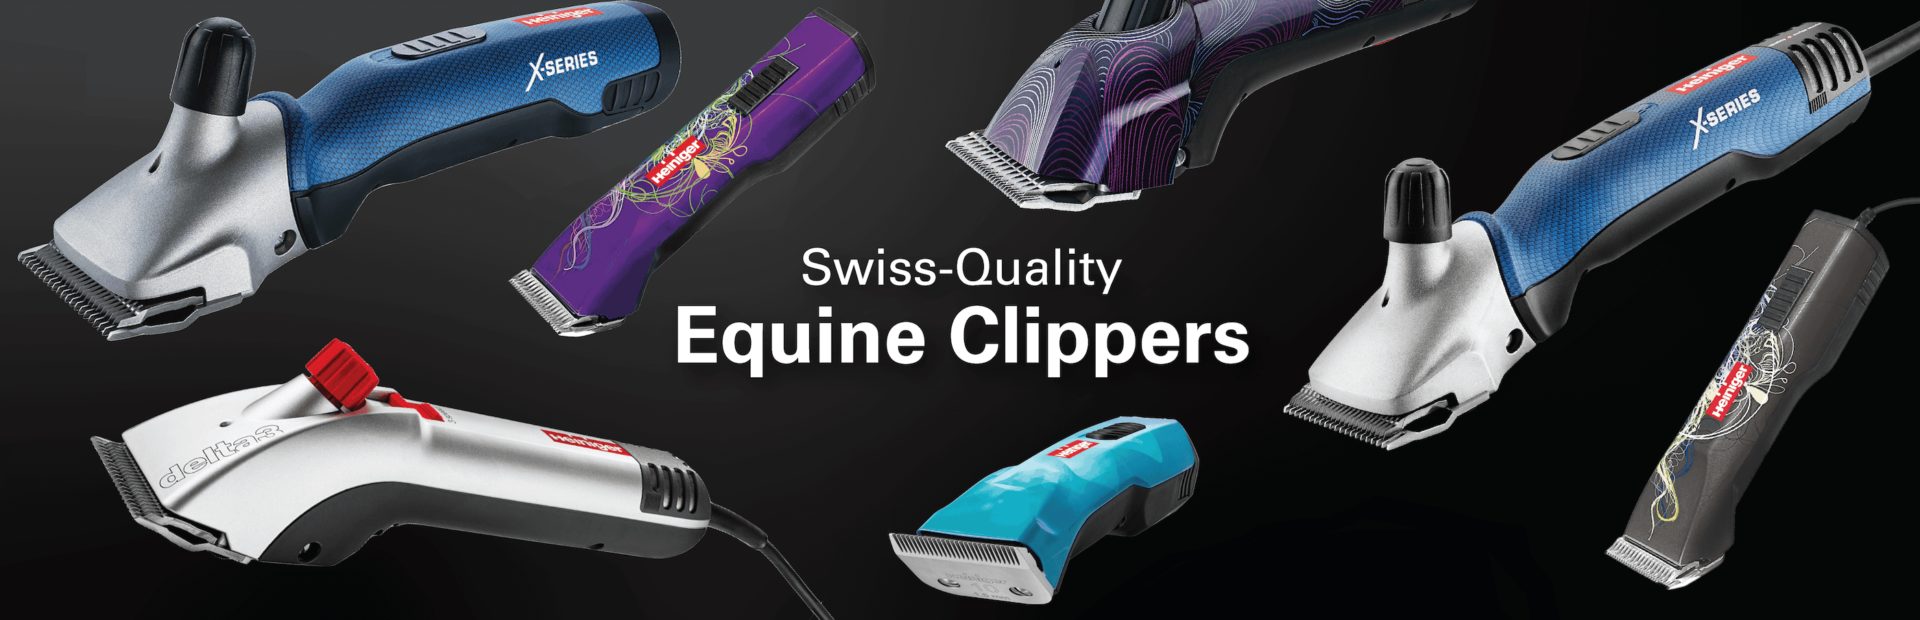 Equine Clippers